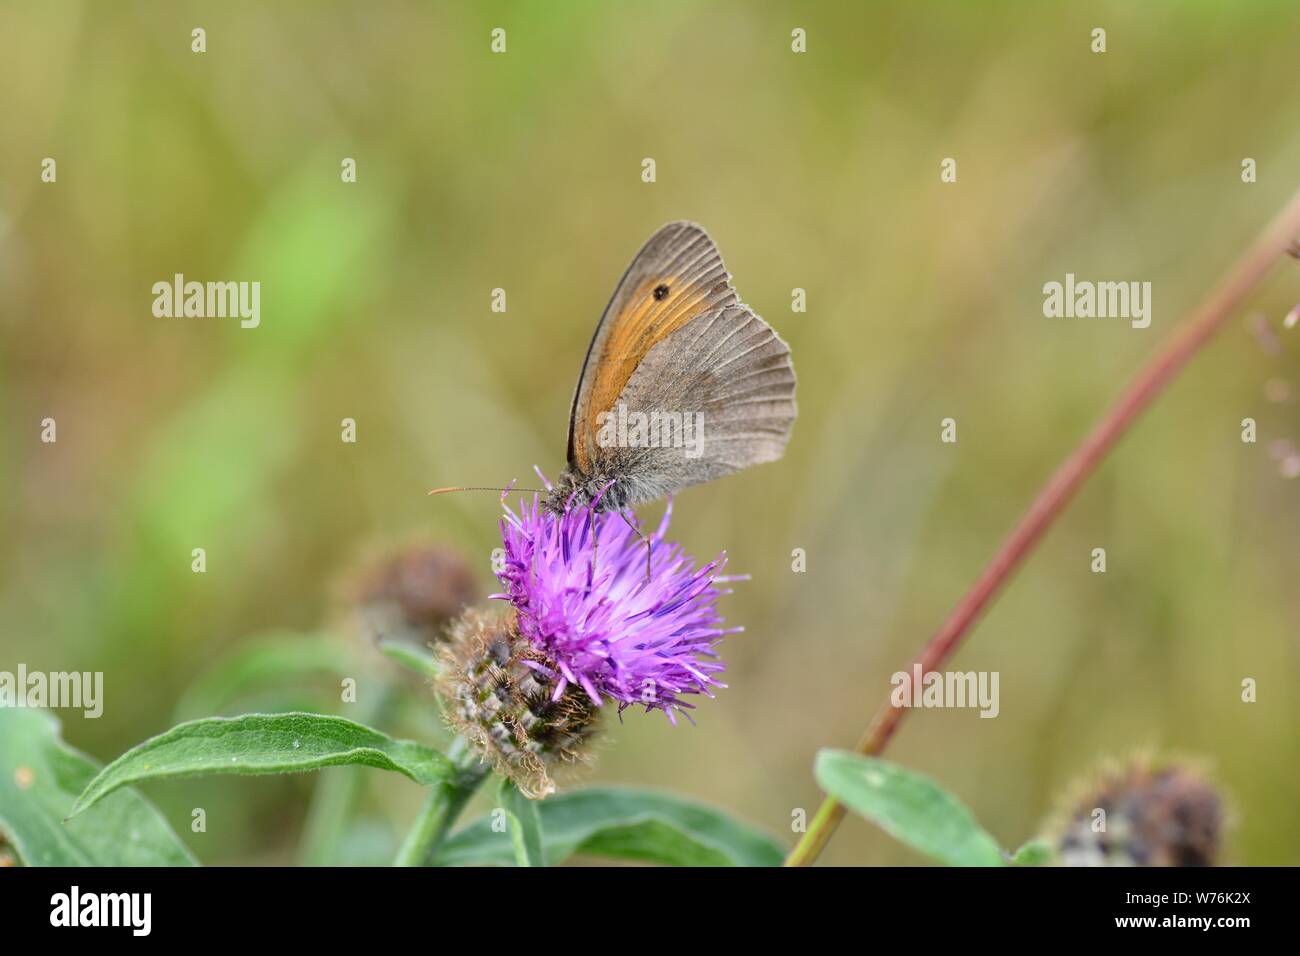 A  meadow bird   -   Hay-fever   (   Coenonympha pamphilus   )   on purple blossom in front of green nature with copy space Stock Photo